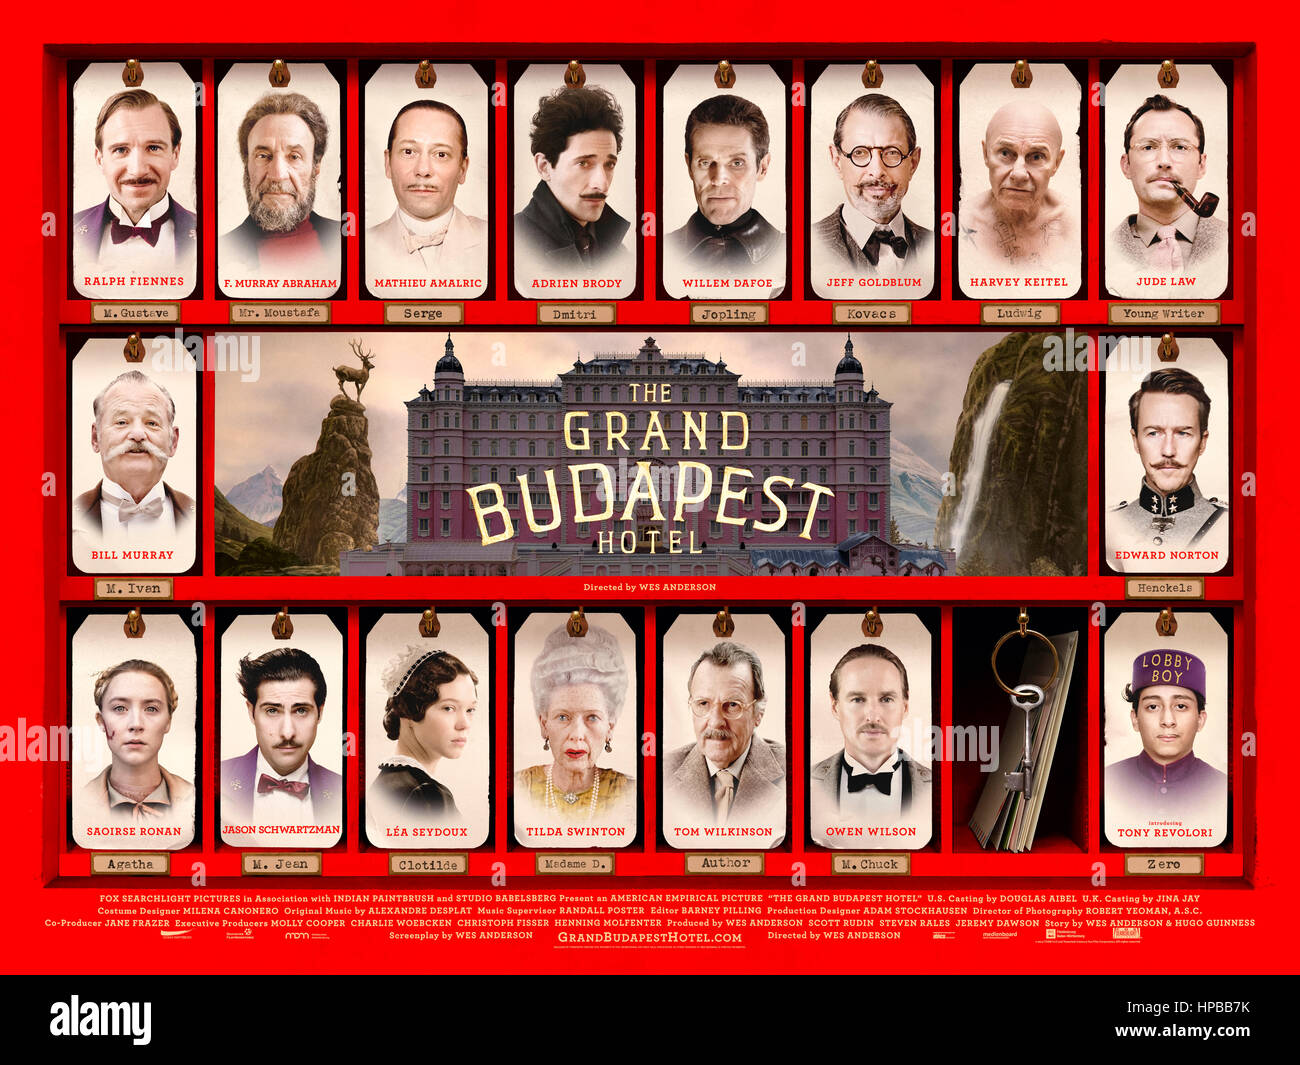 The Grand Budapest Hotel (2014) directed by Wes Anderson and starring Ralph Fiennes, F. Murray Abraham and Mathieu Amalric. Award winning comedy starring an ensemble cast about a hotel concierge who is framed for murder and must prove his innocence. Stock Photo